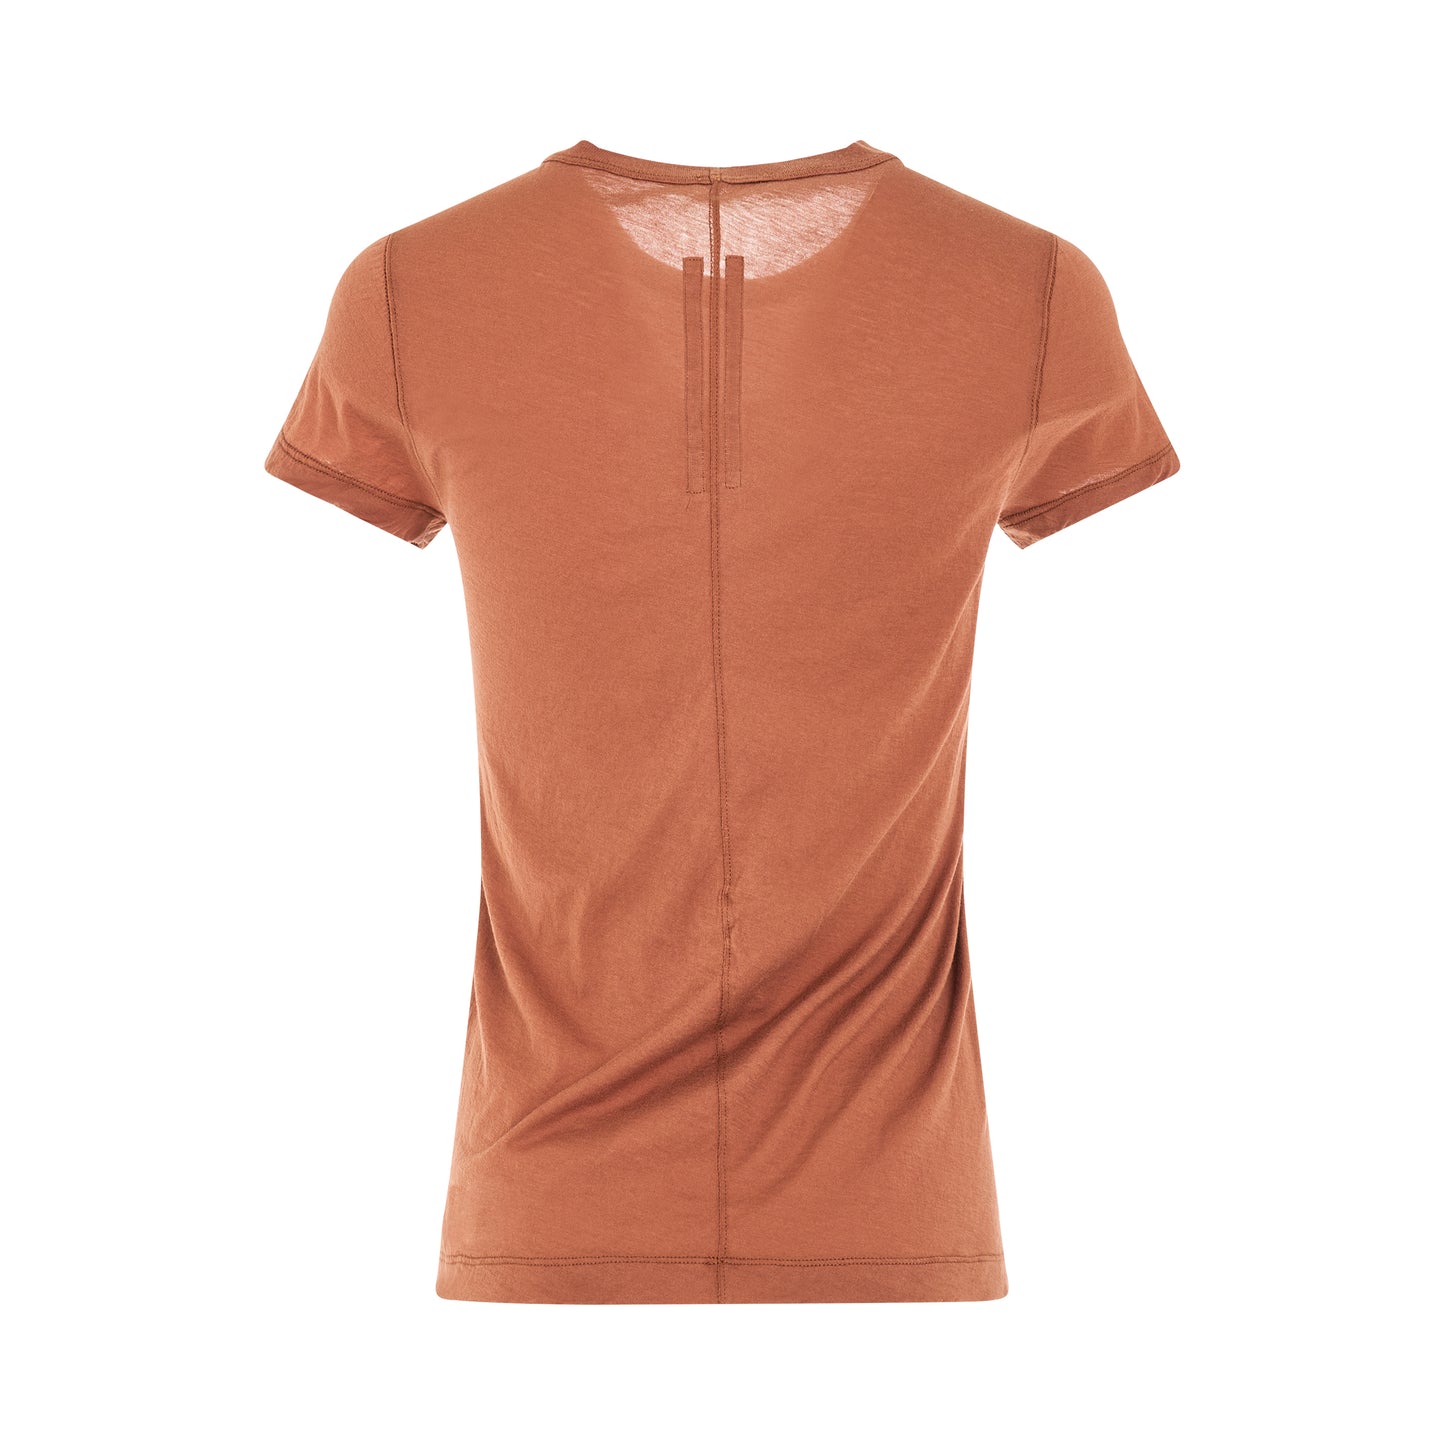 Cropped Level T-Shirt in Henna Brown